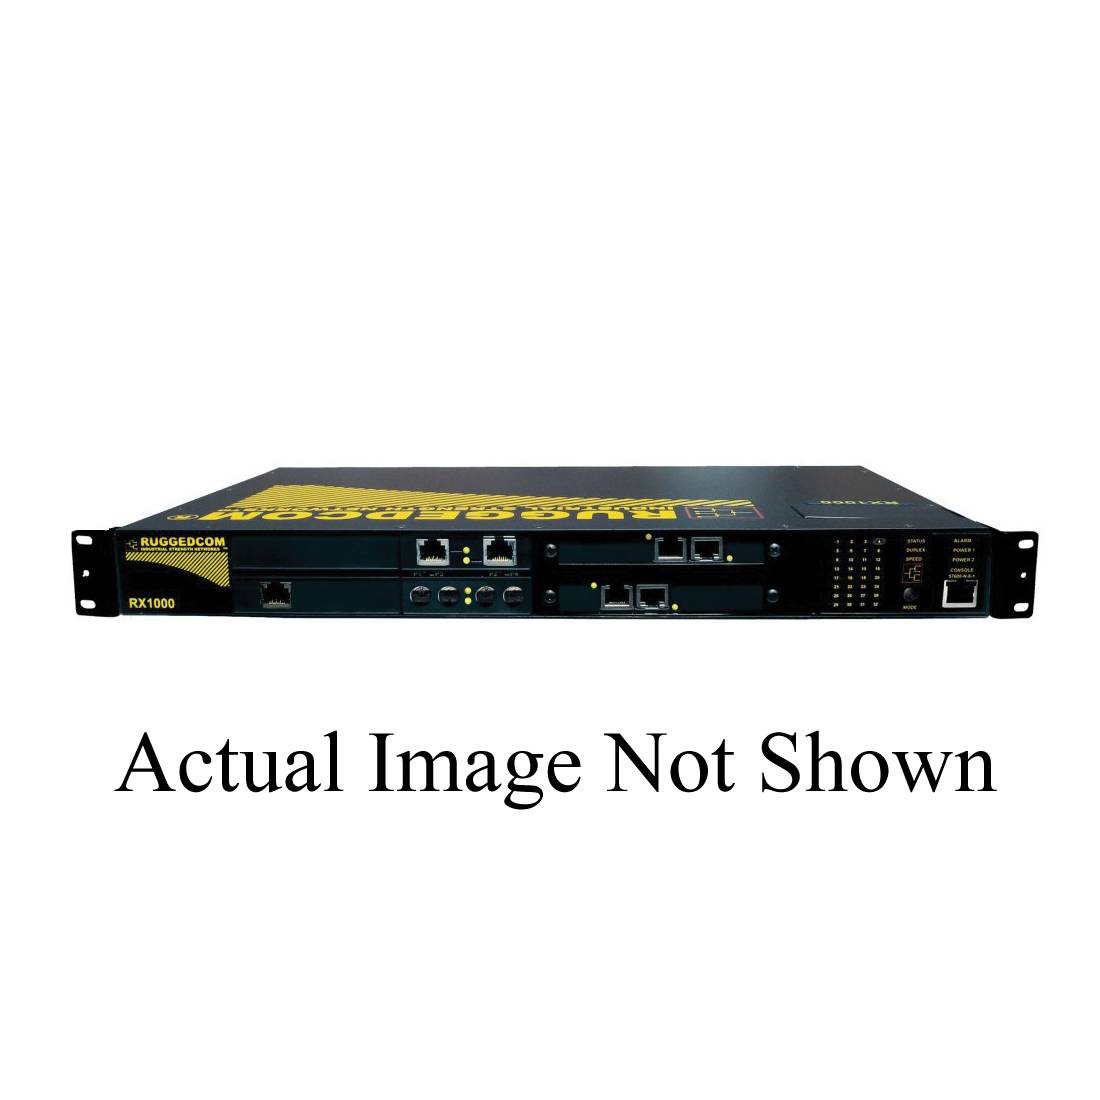 Siemens A6X30090416 RX1000P Industrially Hardened Cyber Security Appliance, 305.8 mm H x 437.4 mm W x 44.5 mm D, RJ-45 Connectivity, 8 Ports (Planned Obsolescence by Manufacturer)